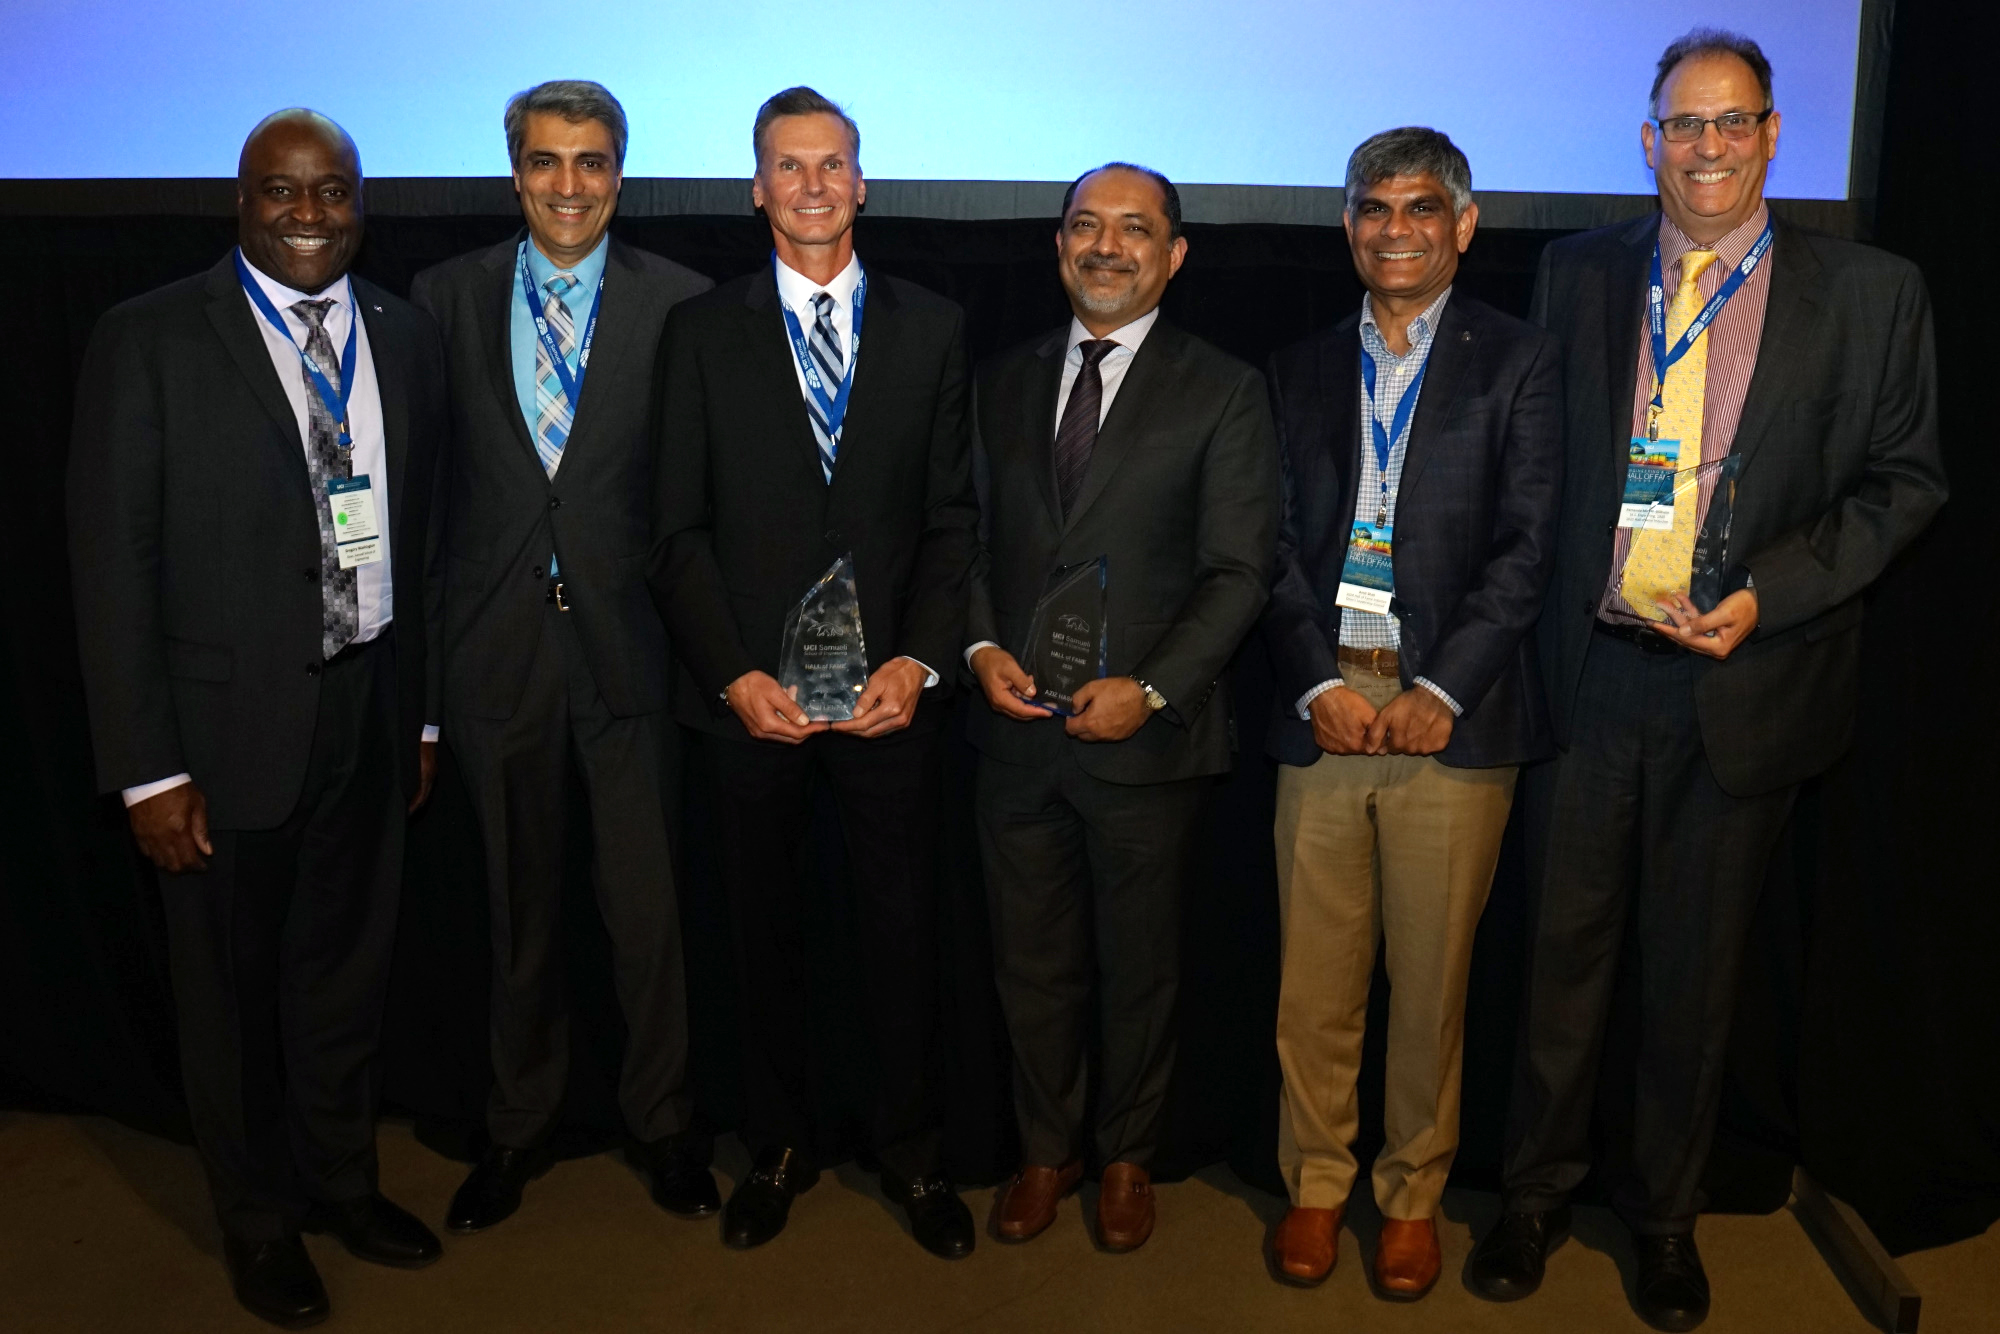 Dean Gregory Washington with Engineering Hall of Fame inductees (from left) Ameesh Divatia, John Lenell, Aziz Hashim, Amit Shah and Fernando Miralles-Wilhelm.